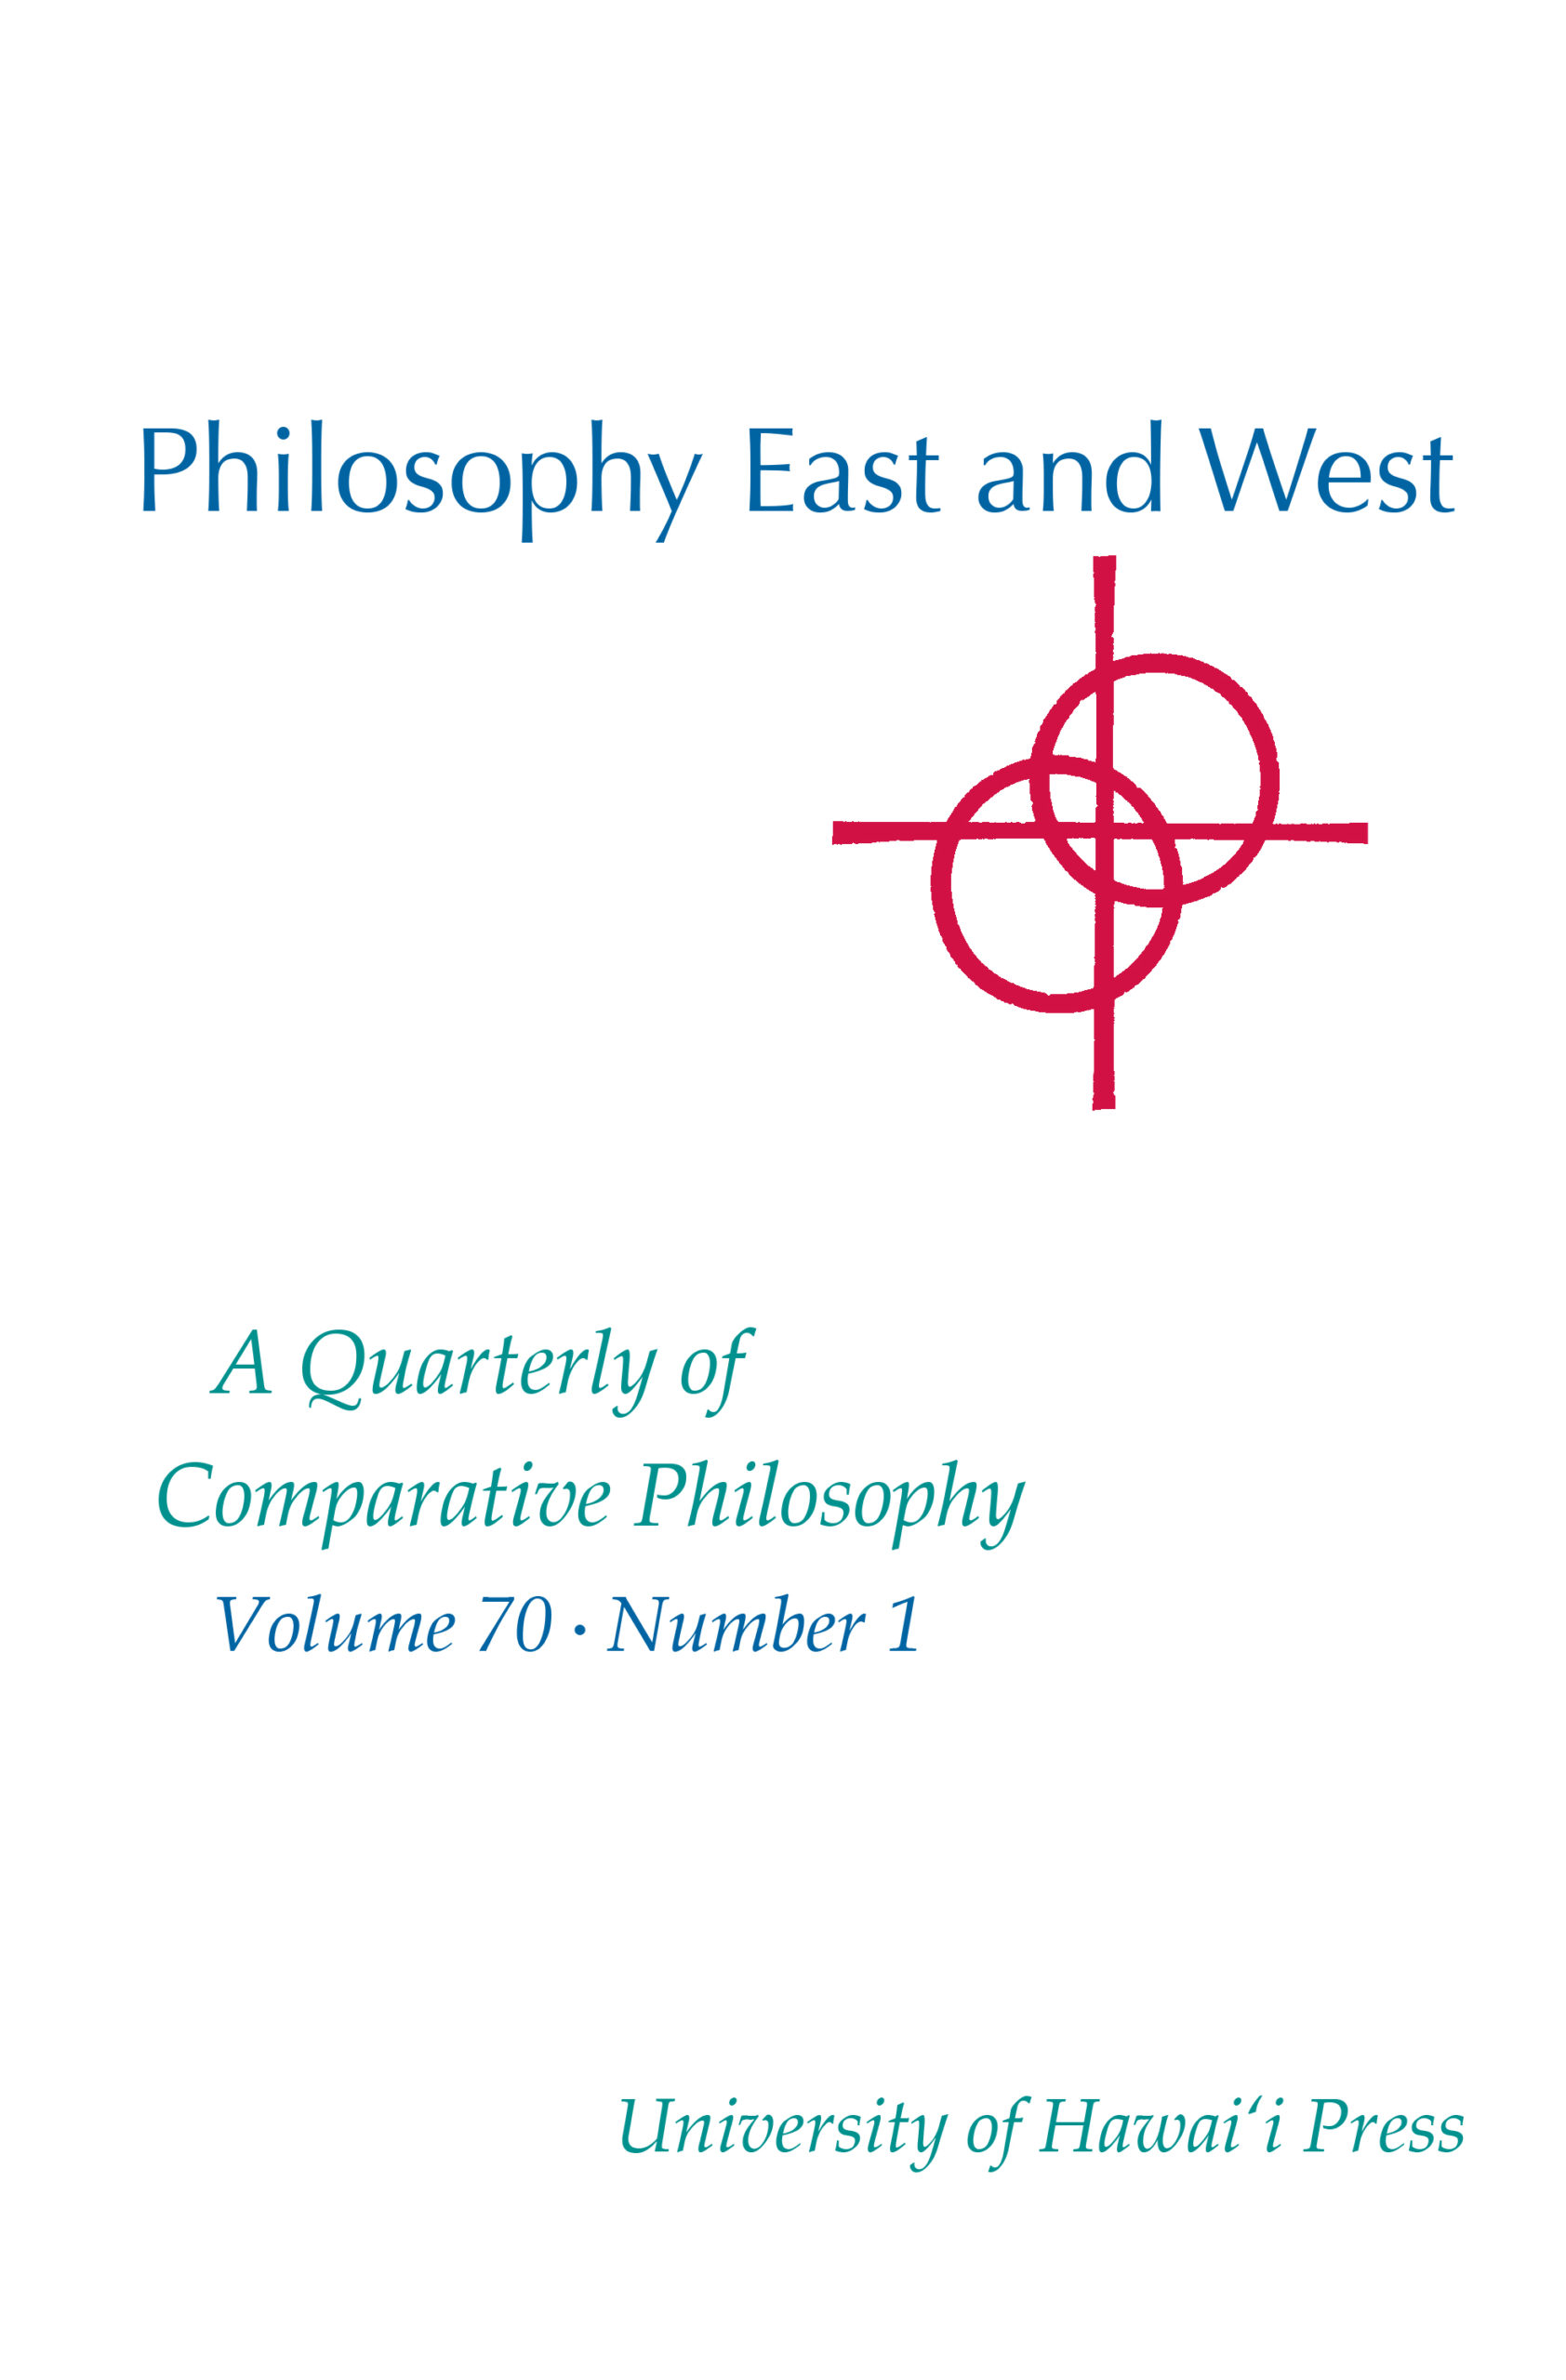 Philosophy East and West Vol. 70, No. 1